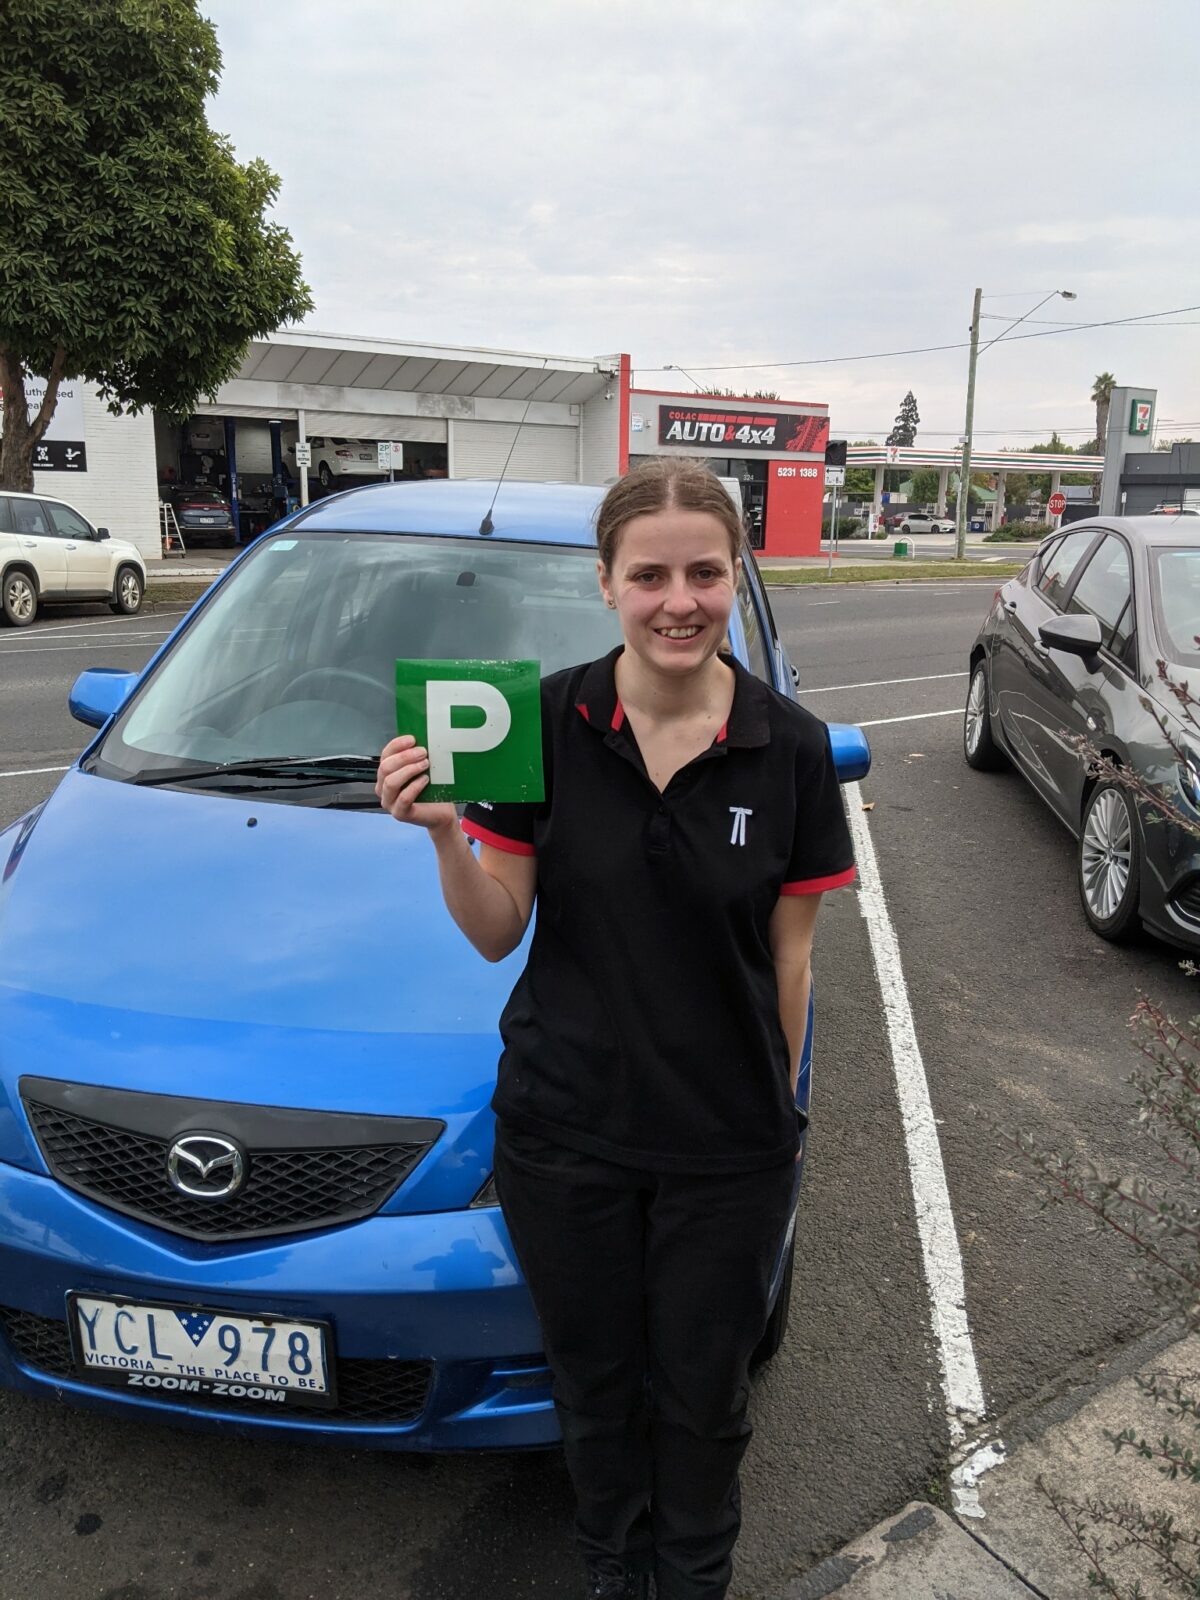 women standing next to new car holding up P plate after gaining license